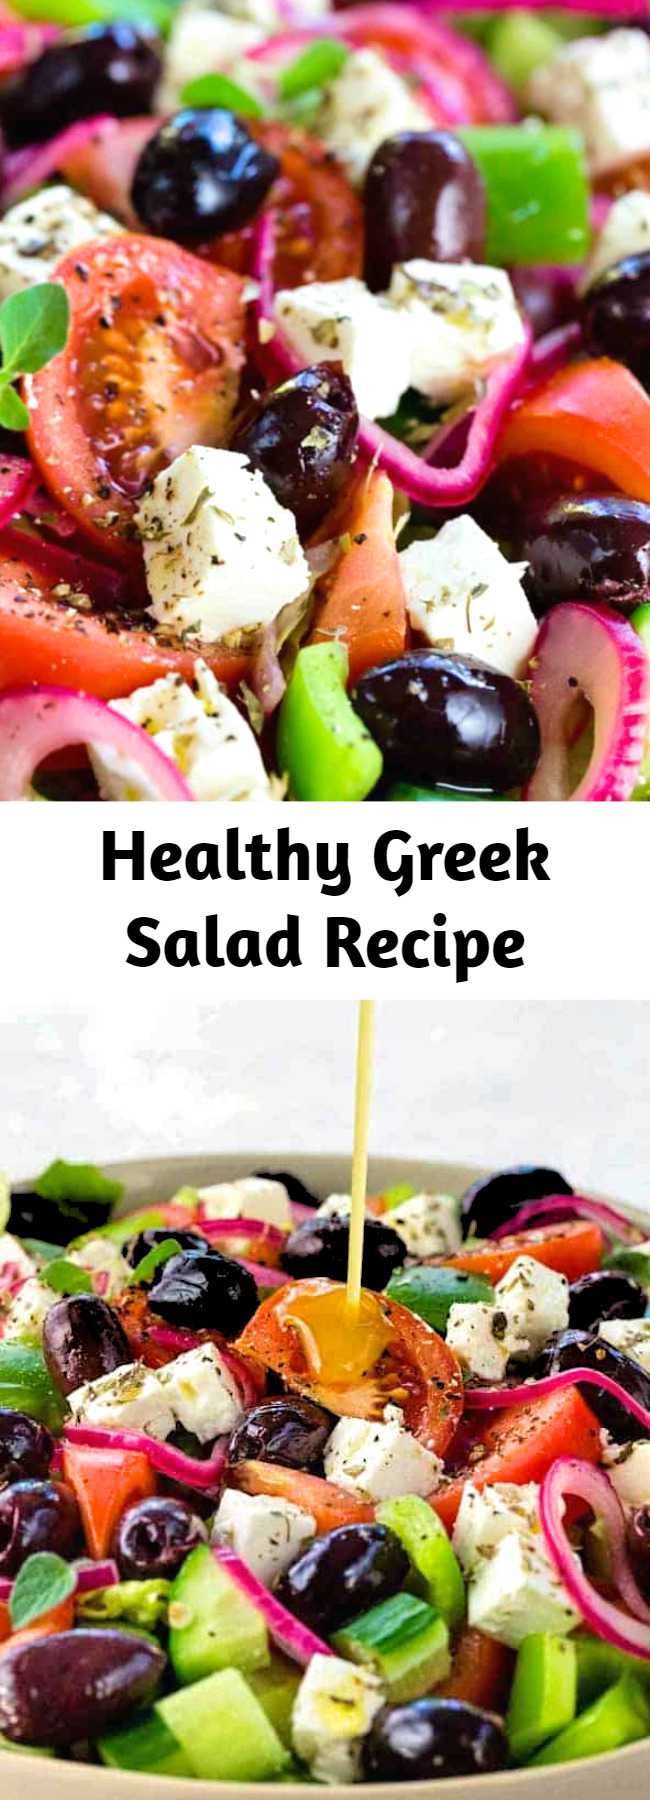 Healthy Greek Salad Recipe - This Greek salad is a healthy vegetable packed appetizer drizzled with a homemade red wine vinegar dressing. Each serving contains creamy feta cheese, kalamata olives, tomatoes, bell peppers, cucumbers and red onion. #greeksalad #salad